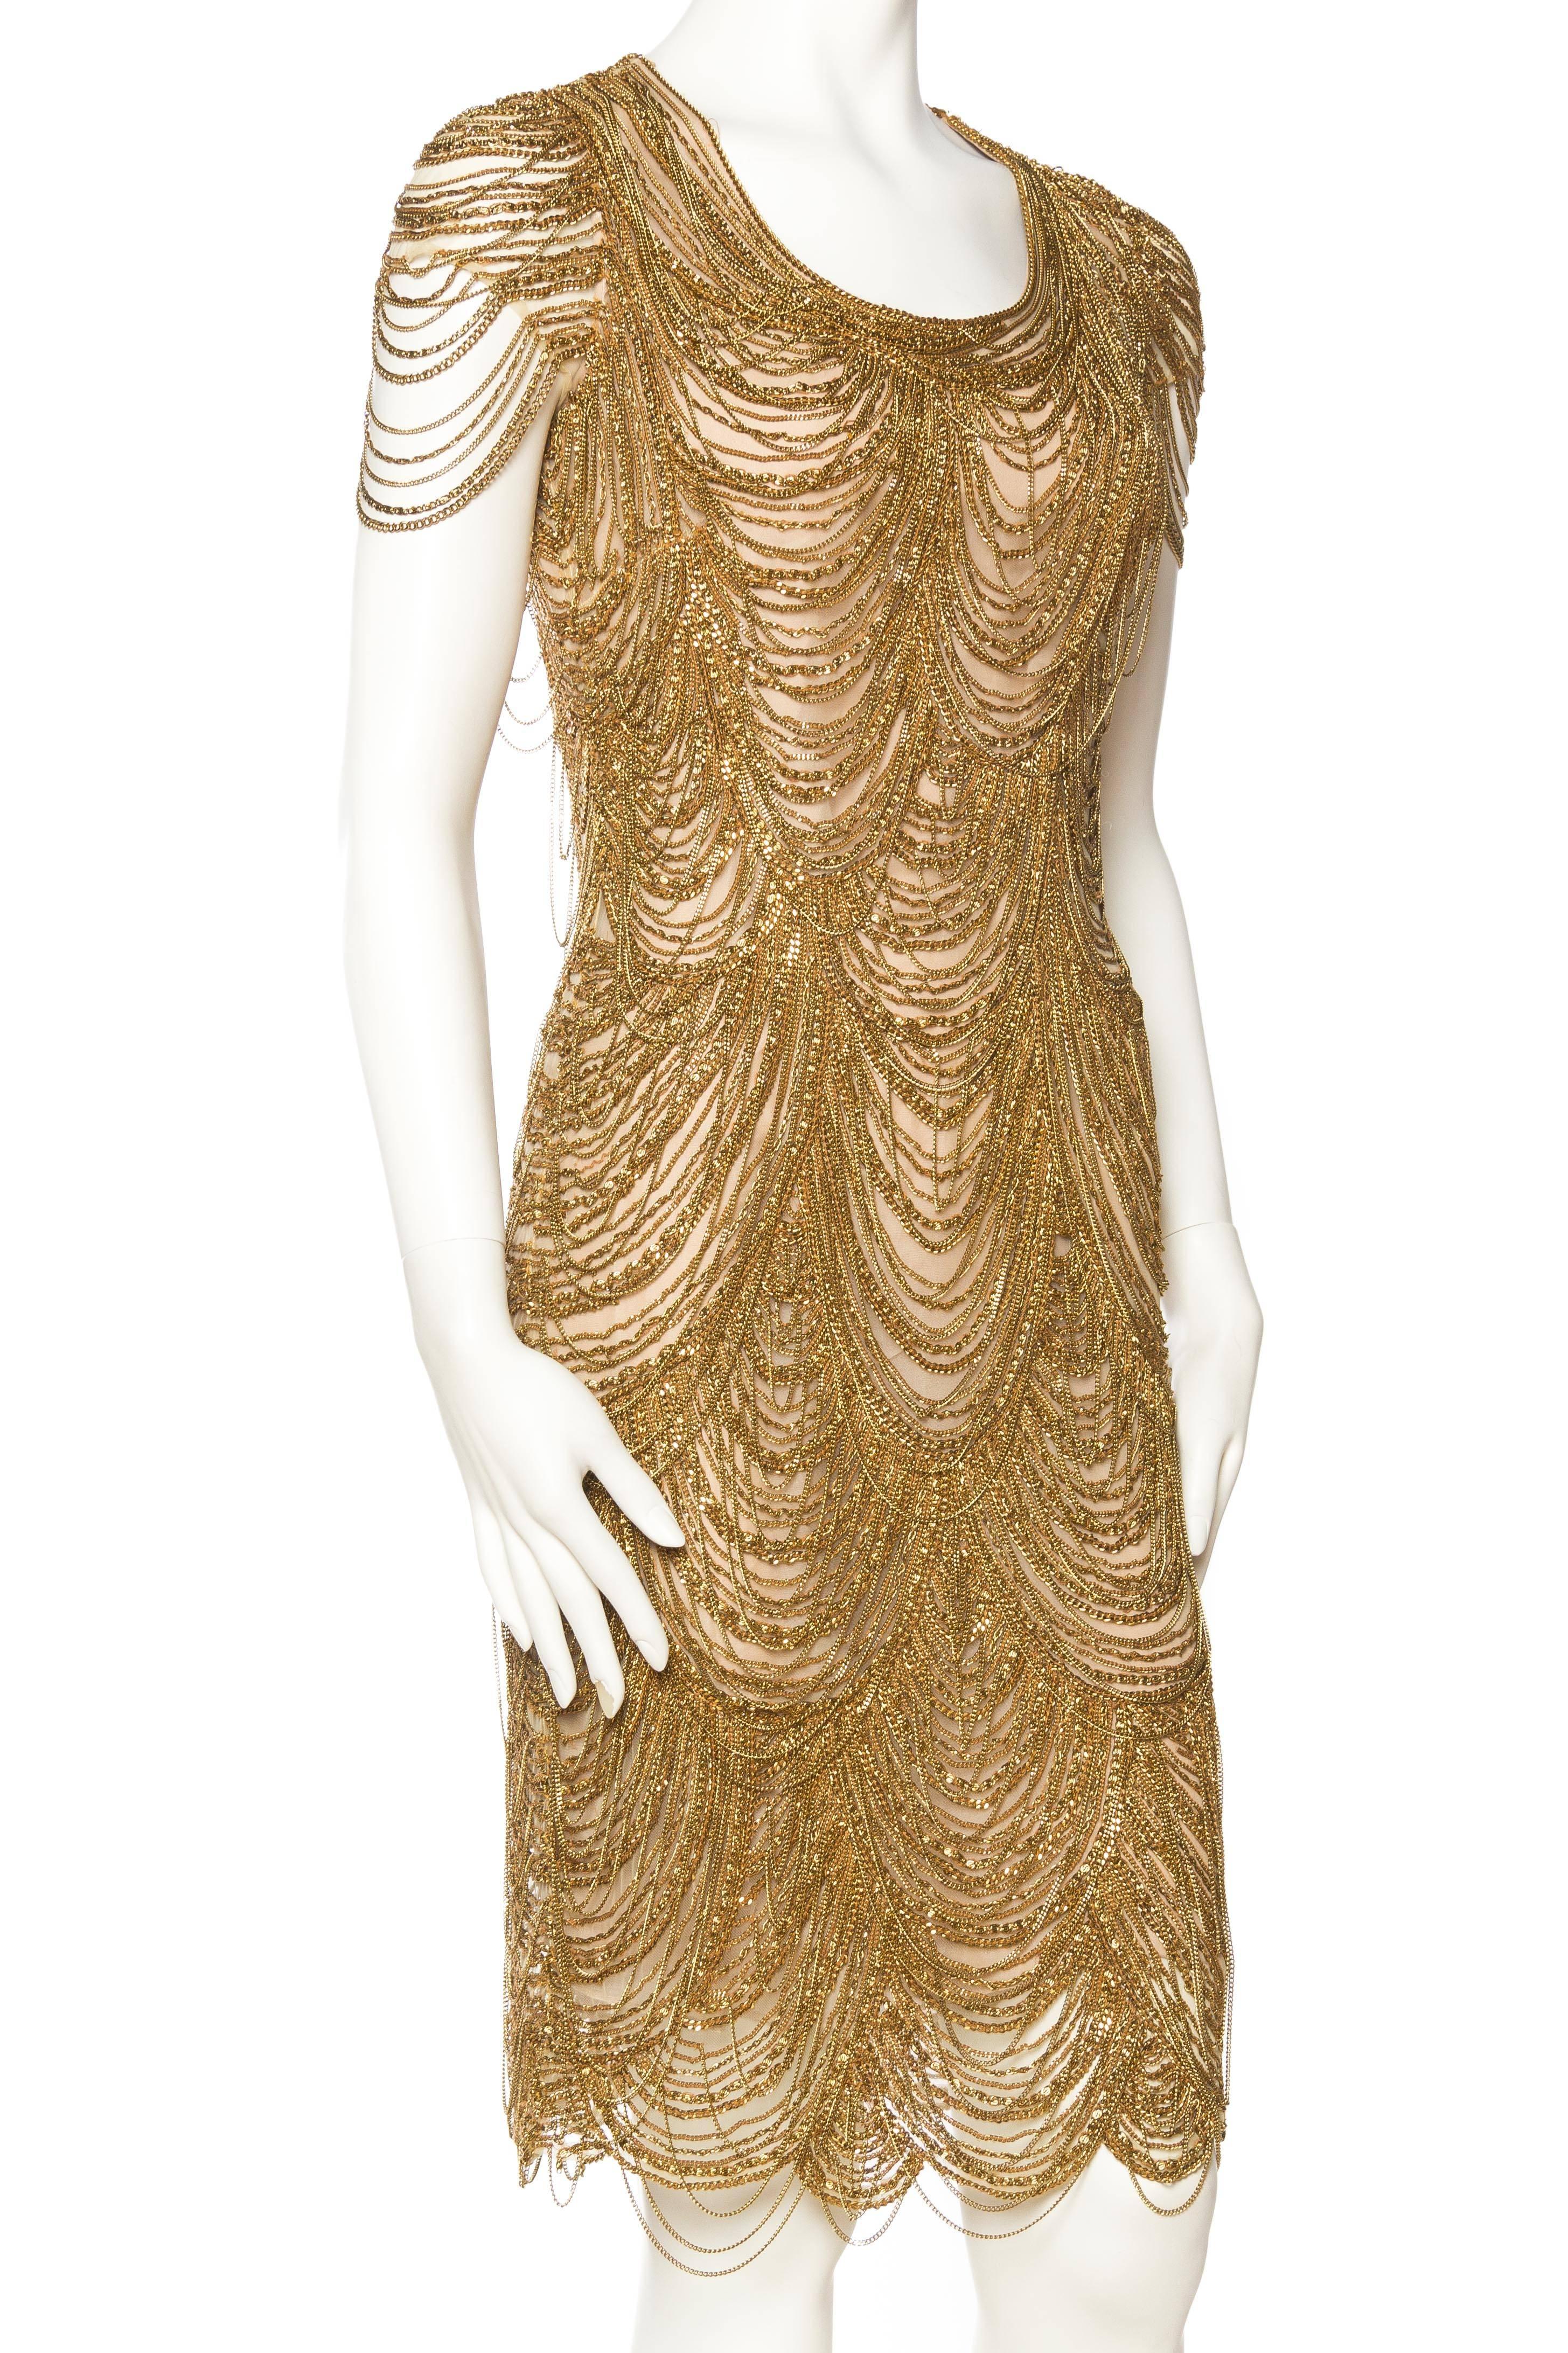 Naeem Khan Nude Dress Dripping in Gold Chains For Sale at 1stDibs